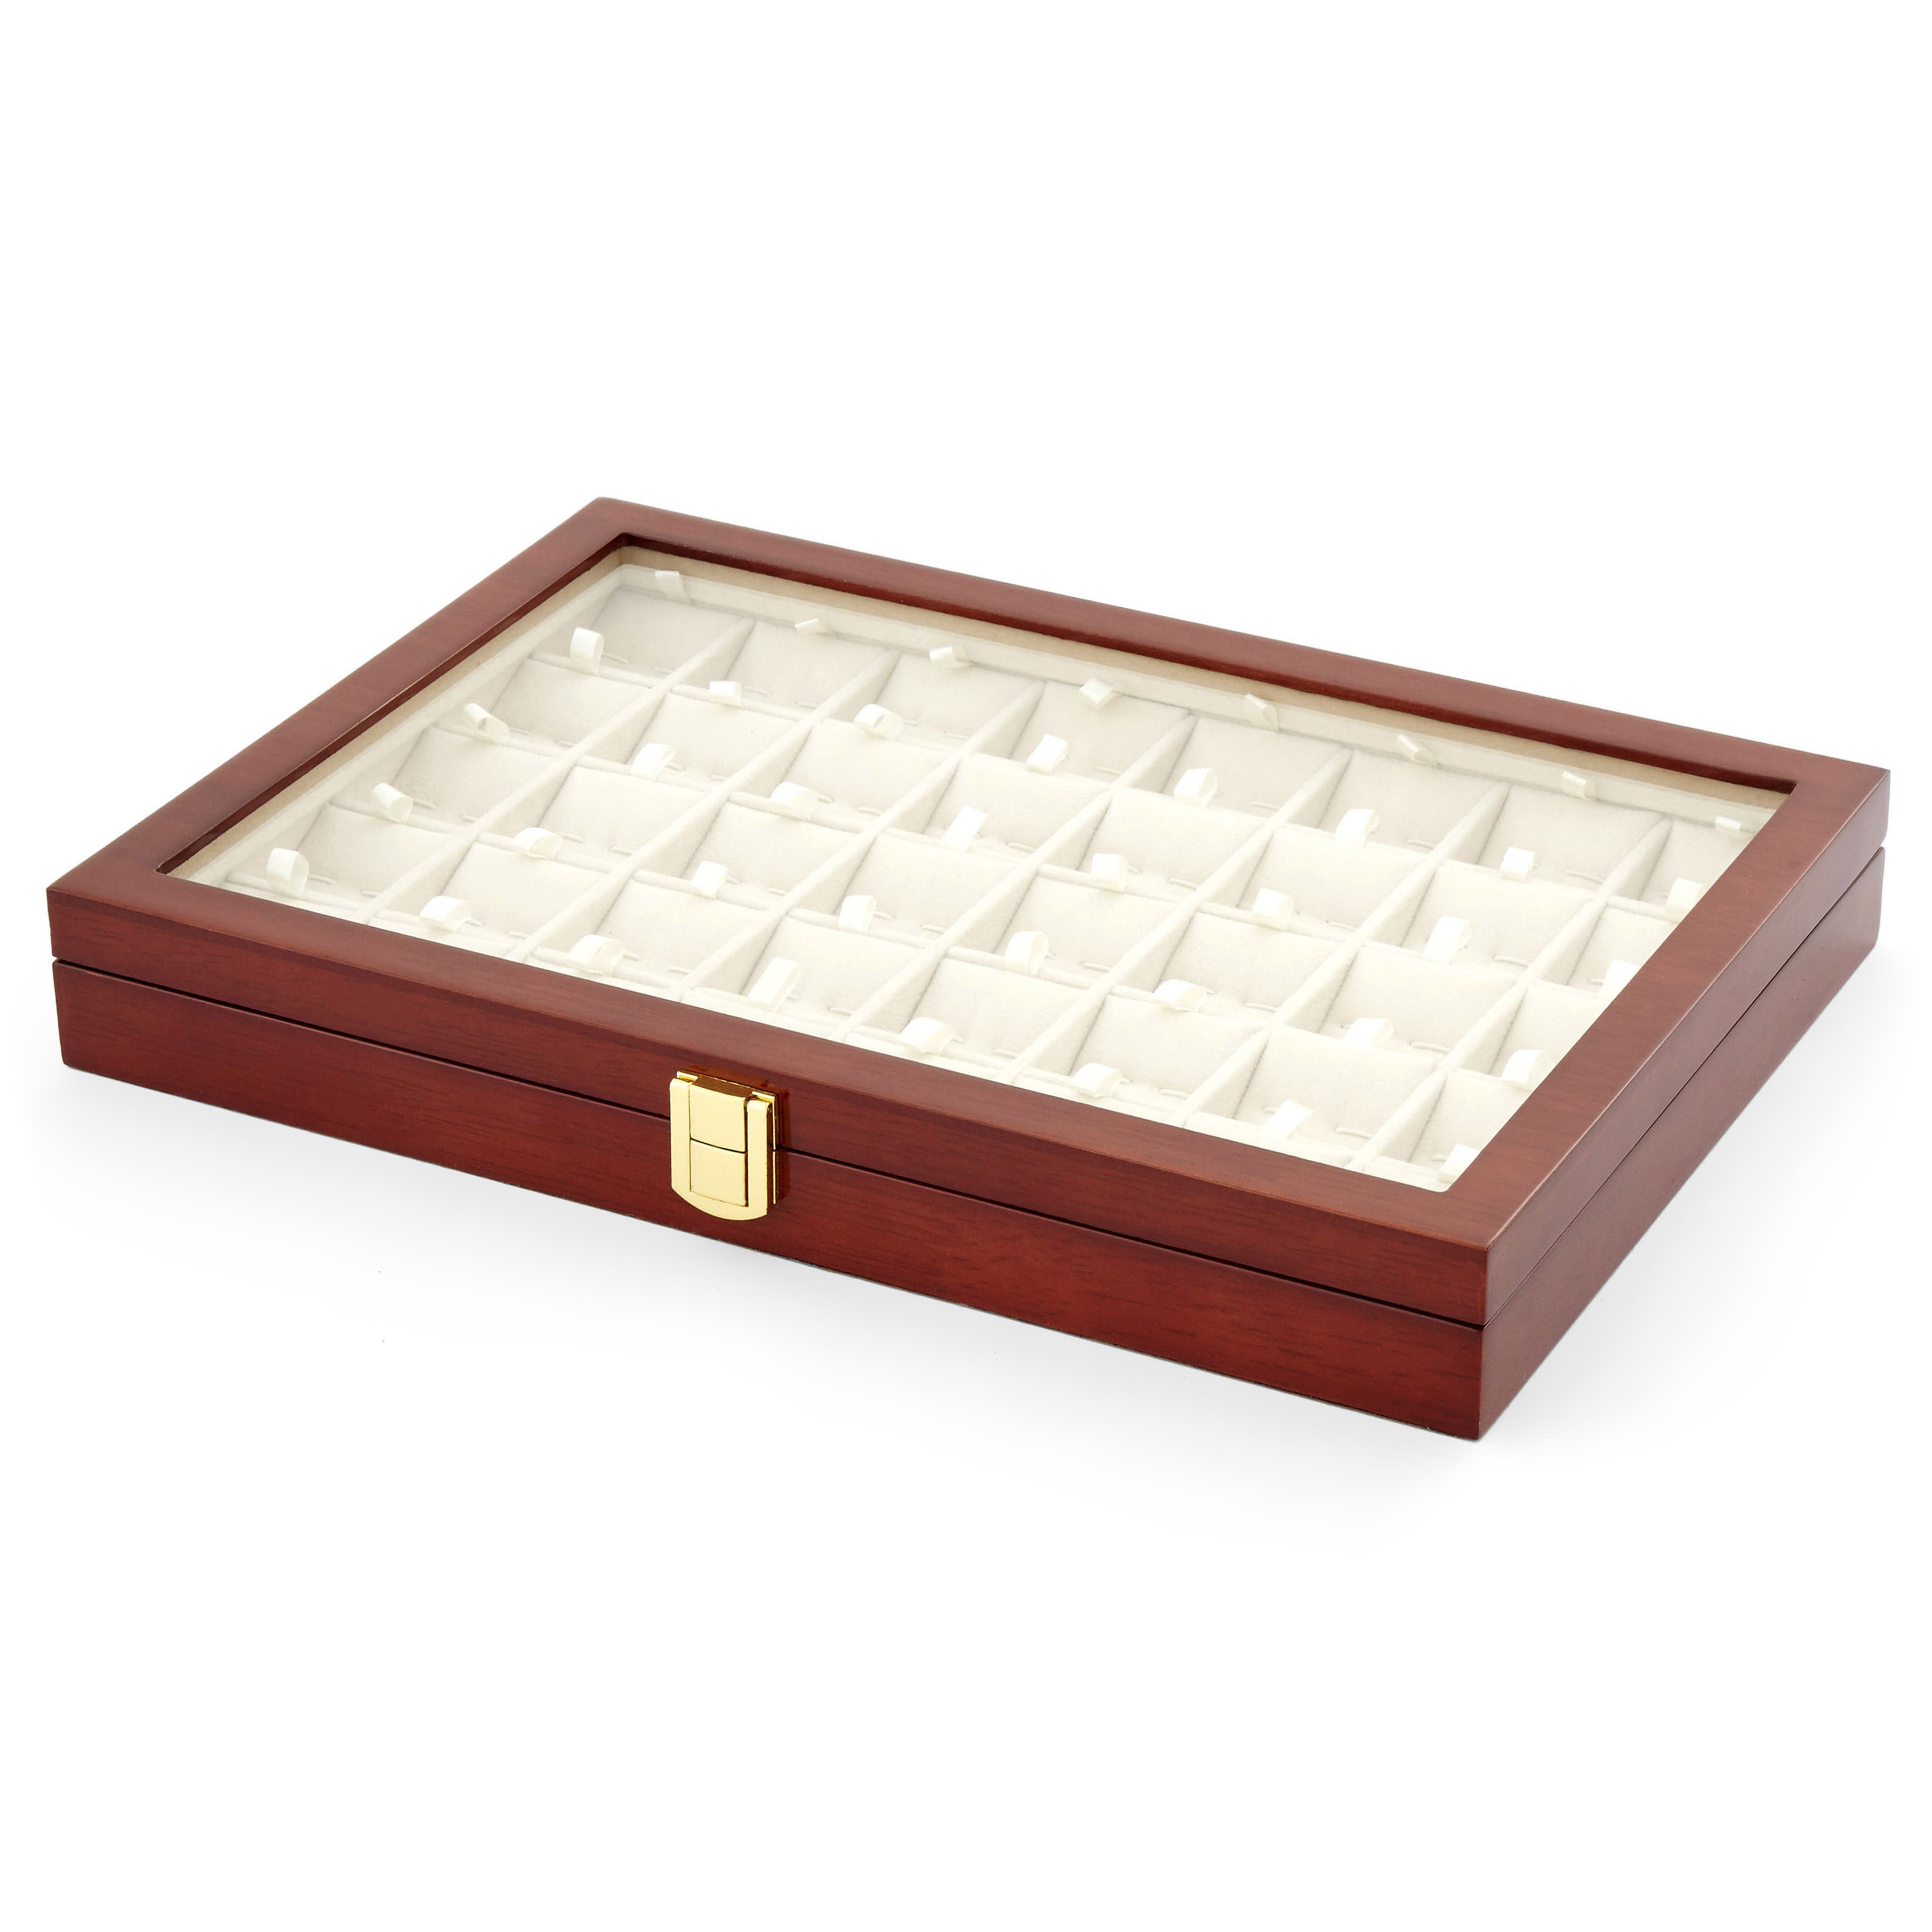 Large Deluxe Cufflinks Display Box